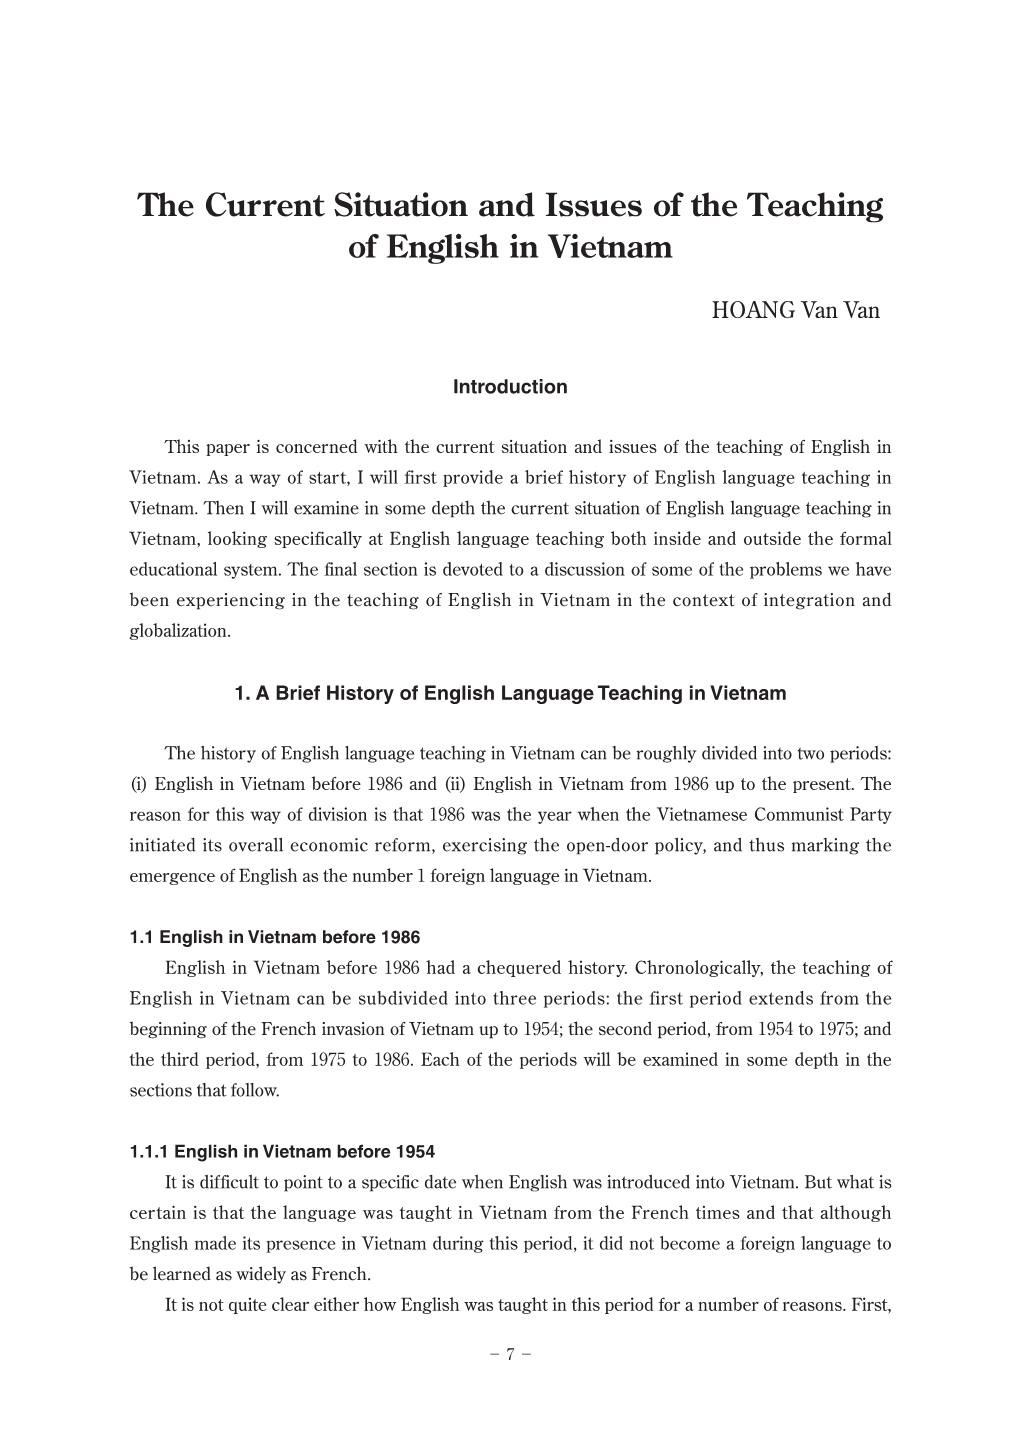 The Current Situation and Issues of the Teaching of English in Vietnam